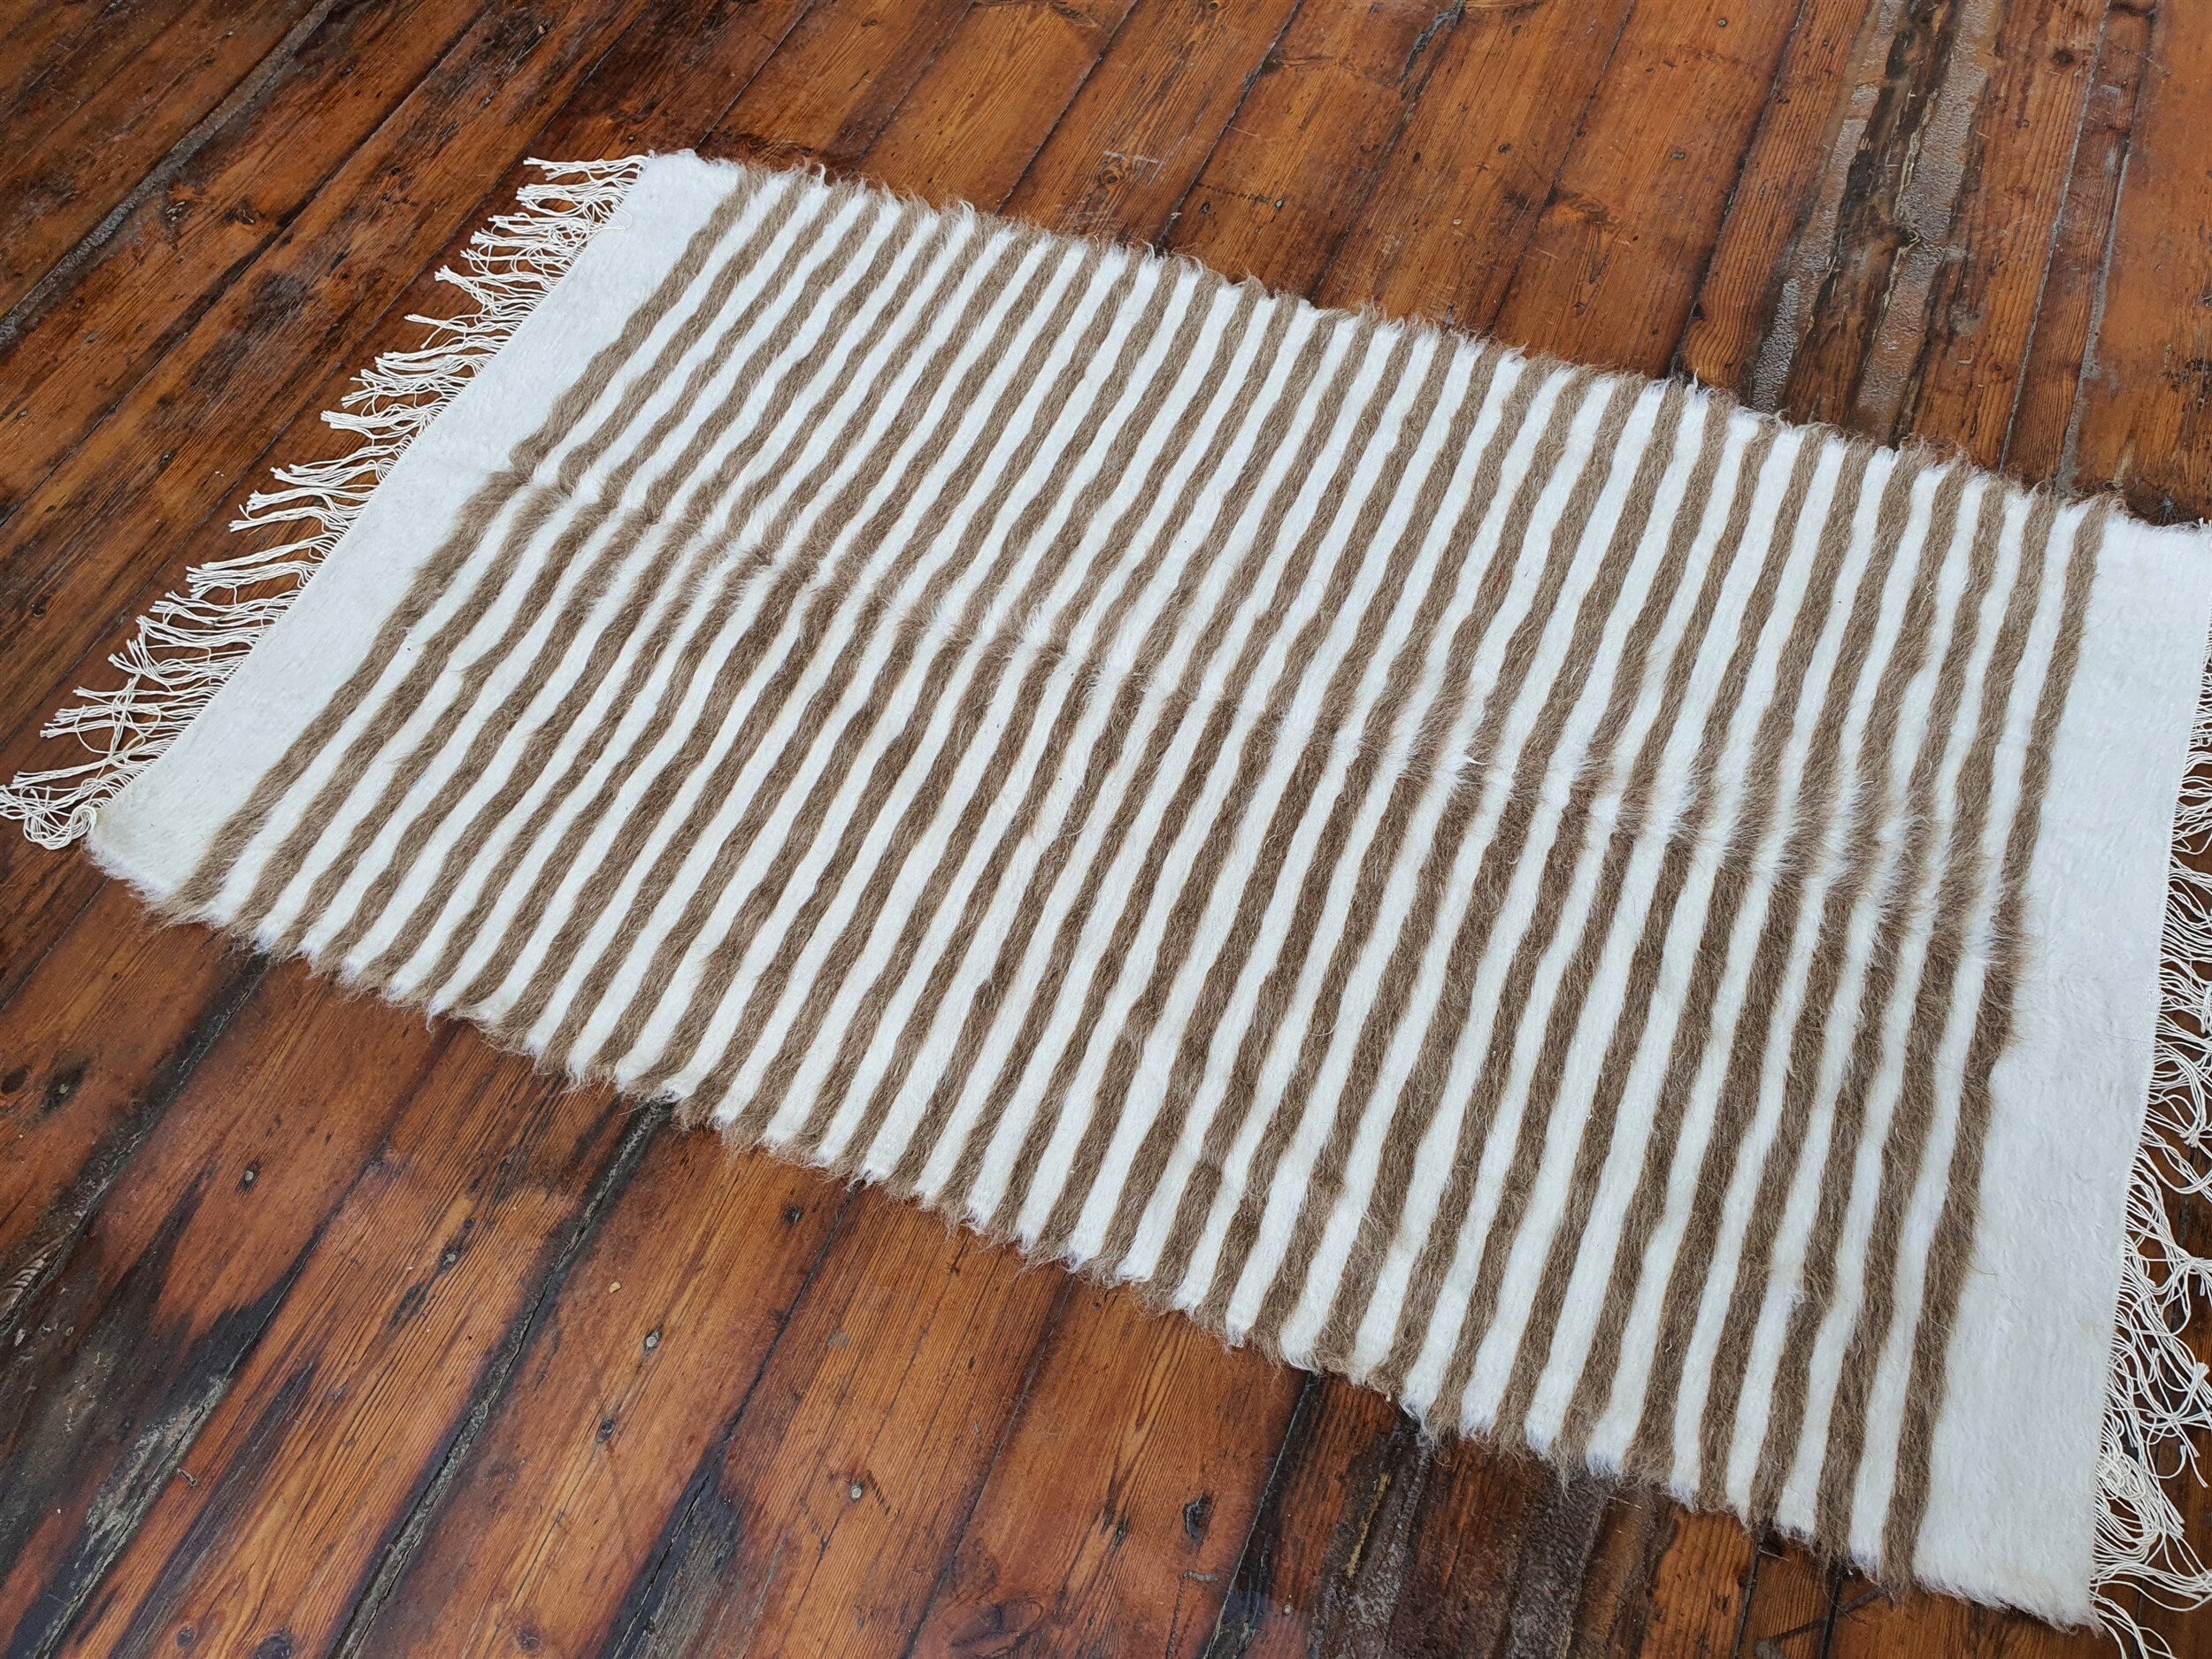 Siirt Angora Vintage Turkish Rug, 4 ft 2 in x 2 ft 6 in Brown and White Striped Tulu Turkish Mat